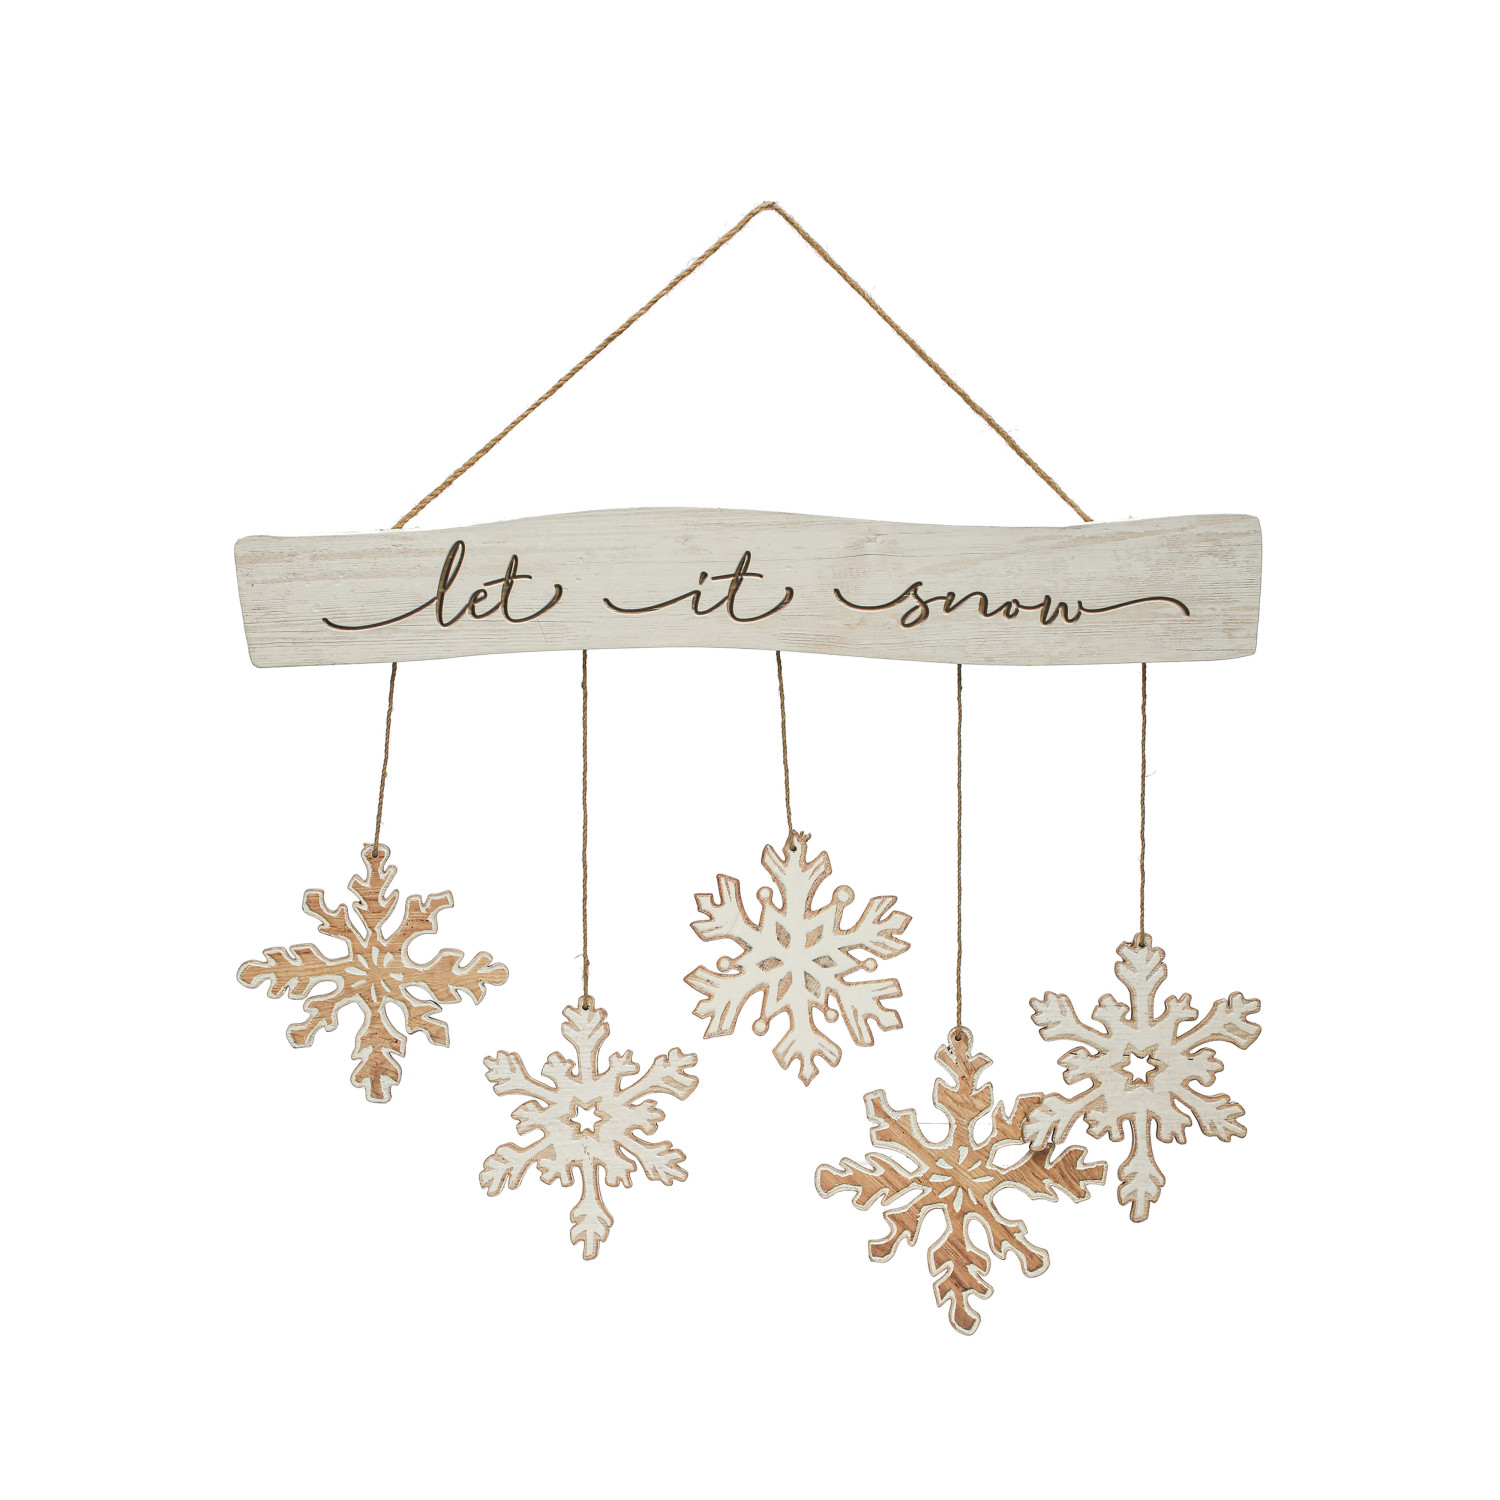 Let It Snow inscription covered with artificial snowflakes · Free